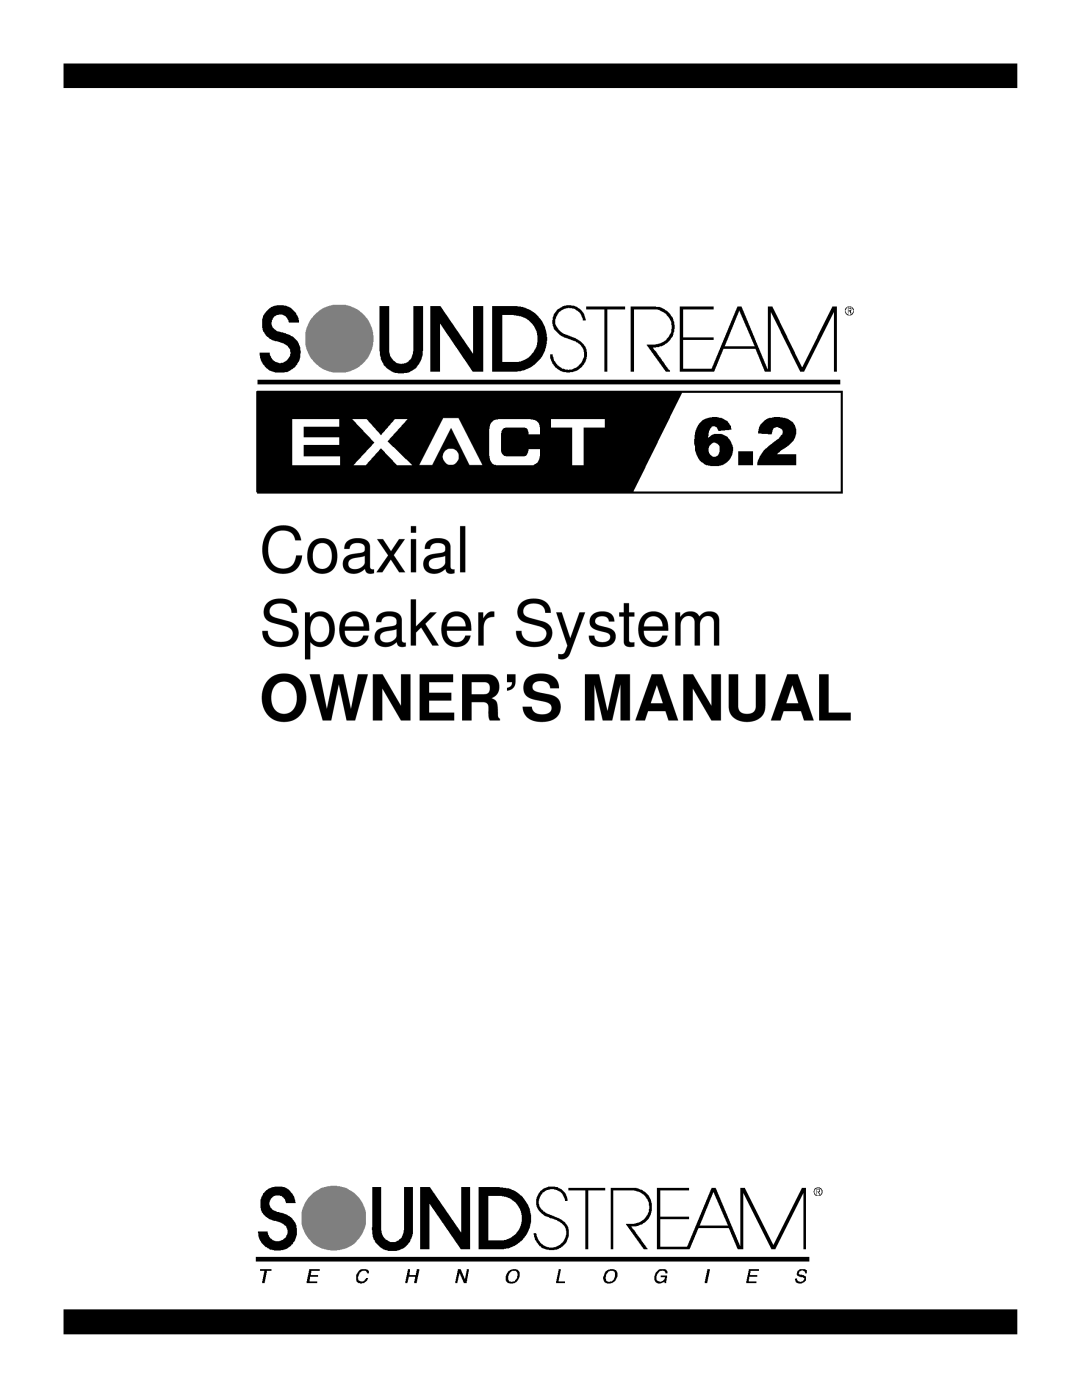 Soundstream Technologies Exact 6.2 owner manual Coaxial Speaker System 